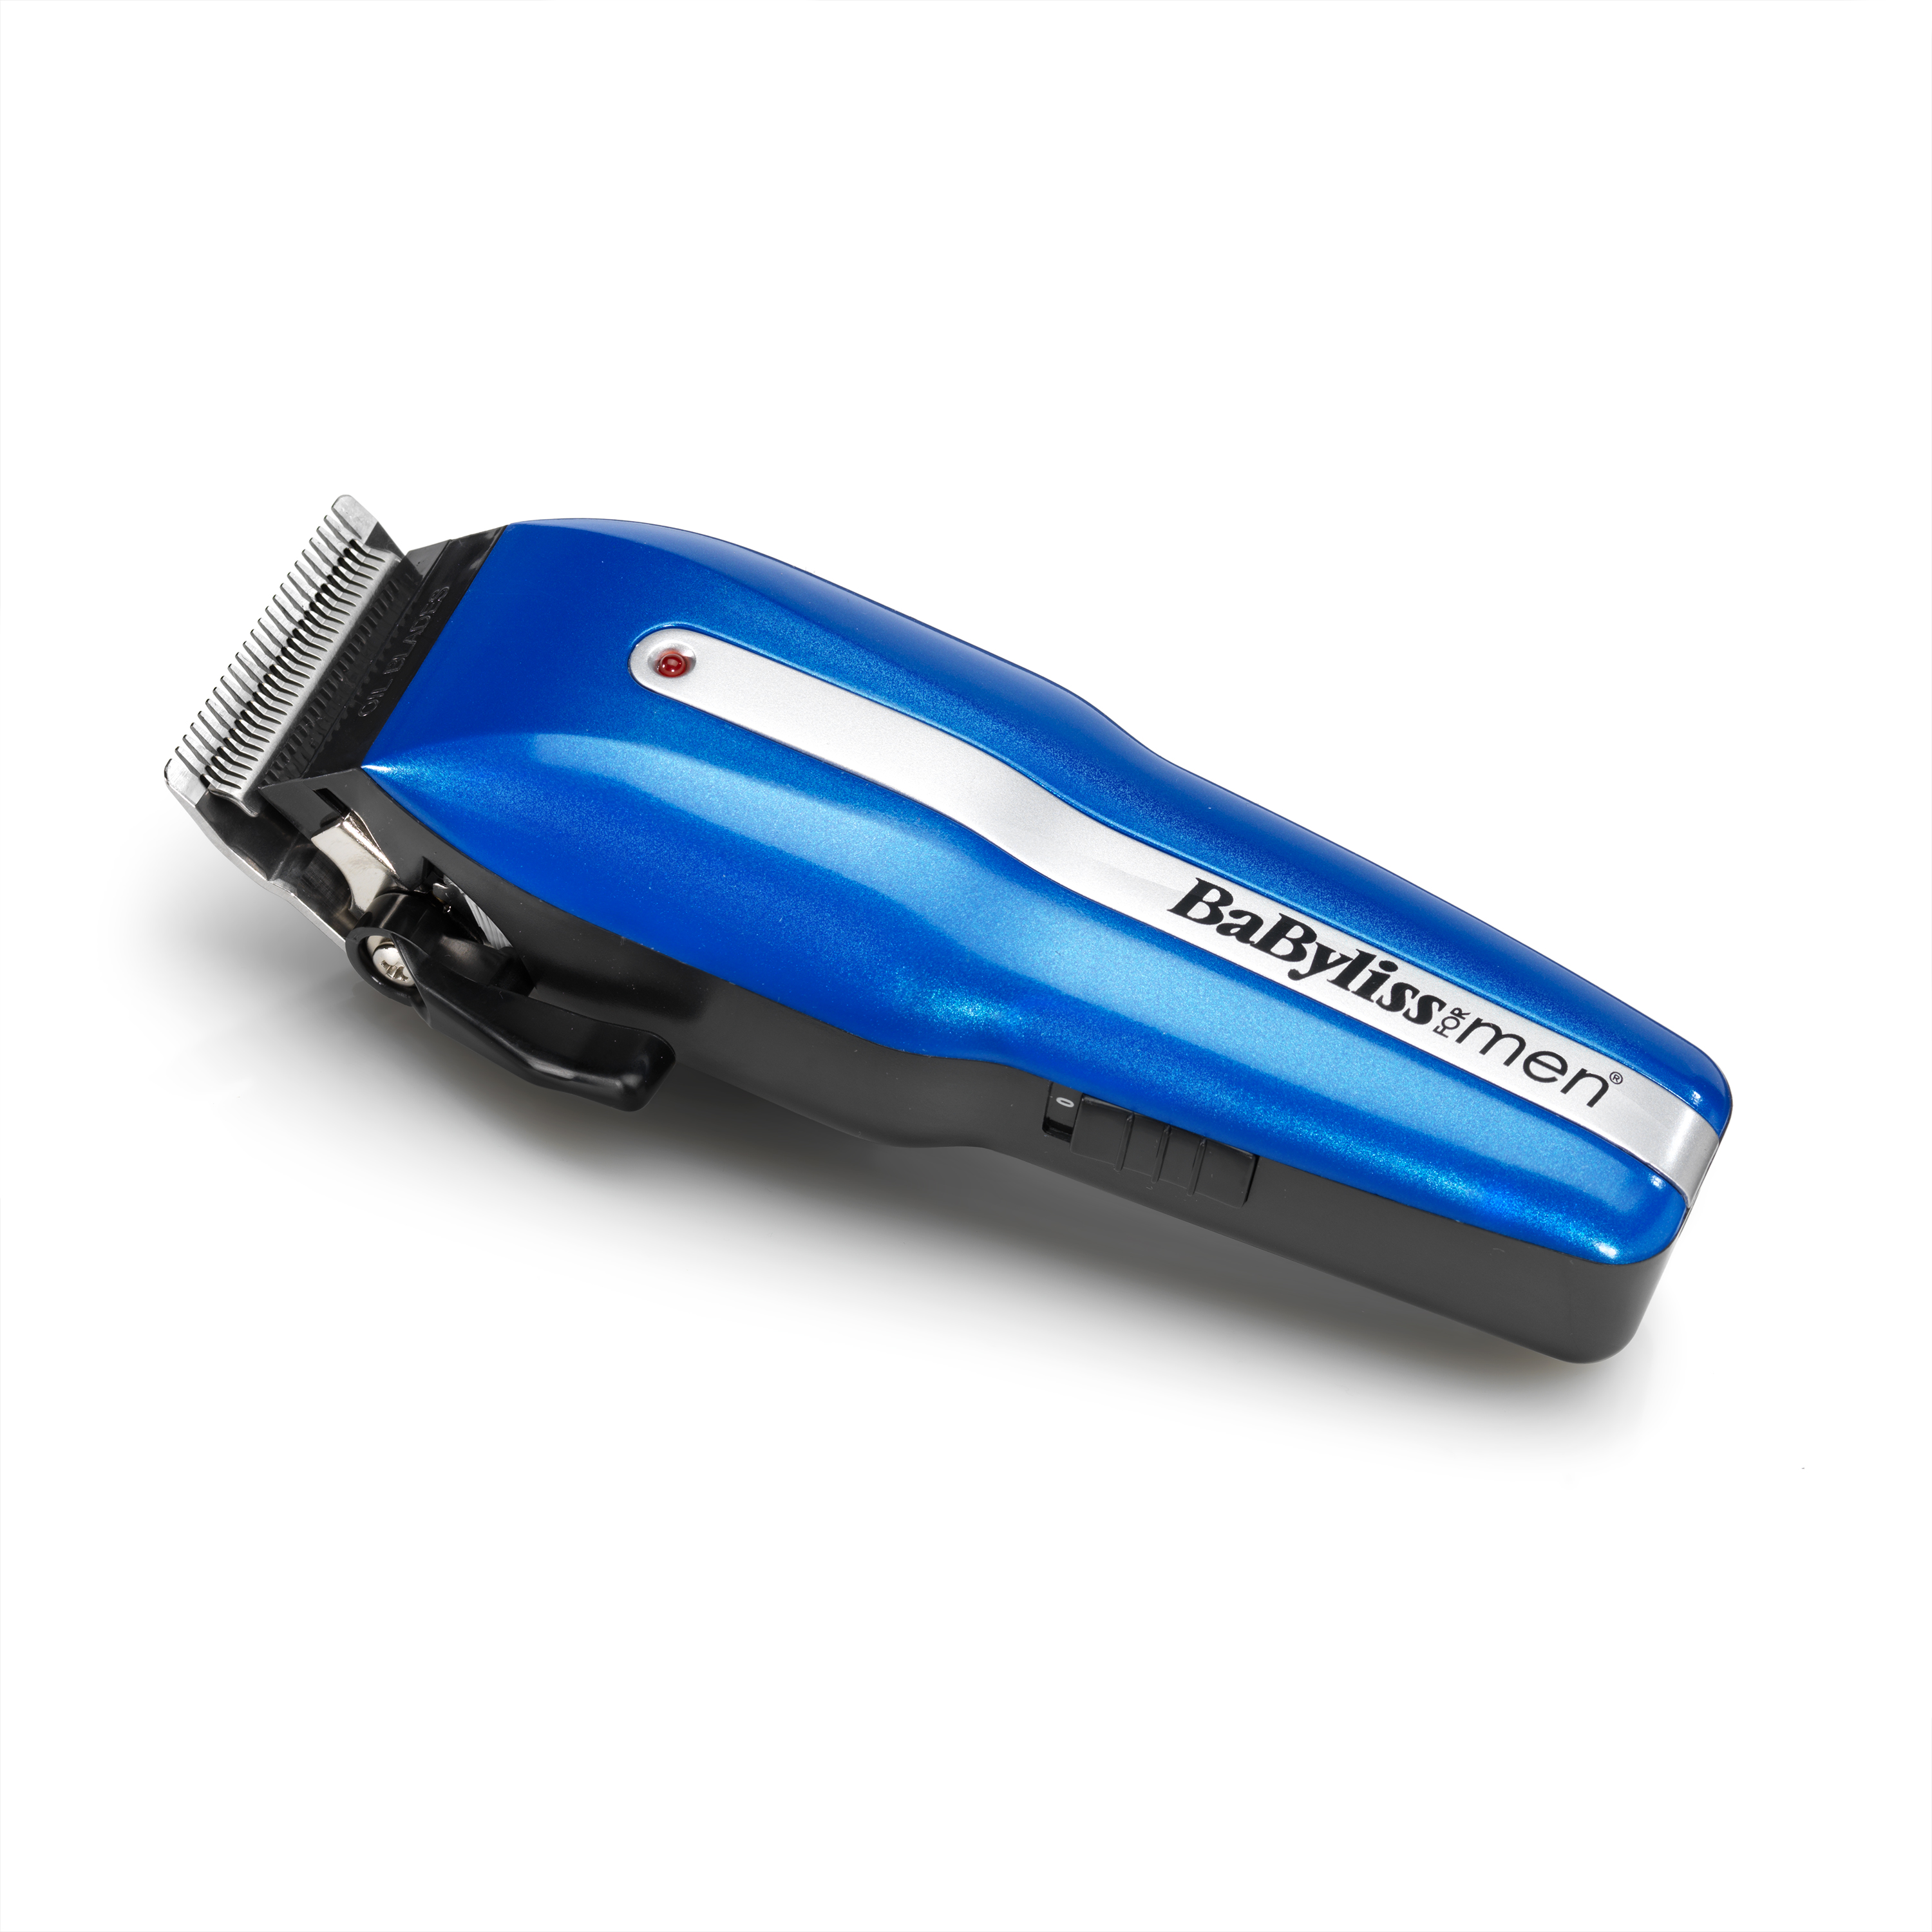 babyliss clippers argos